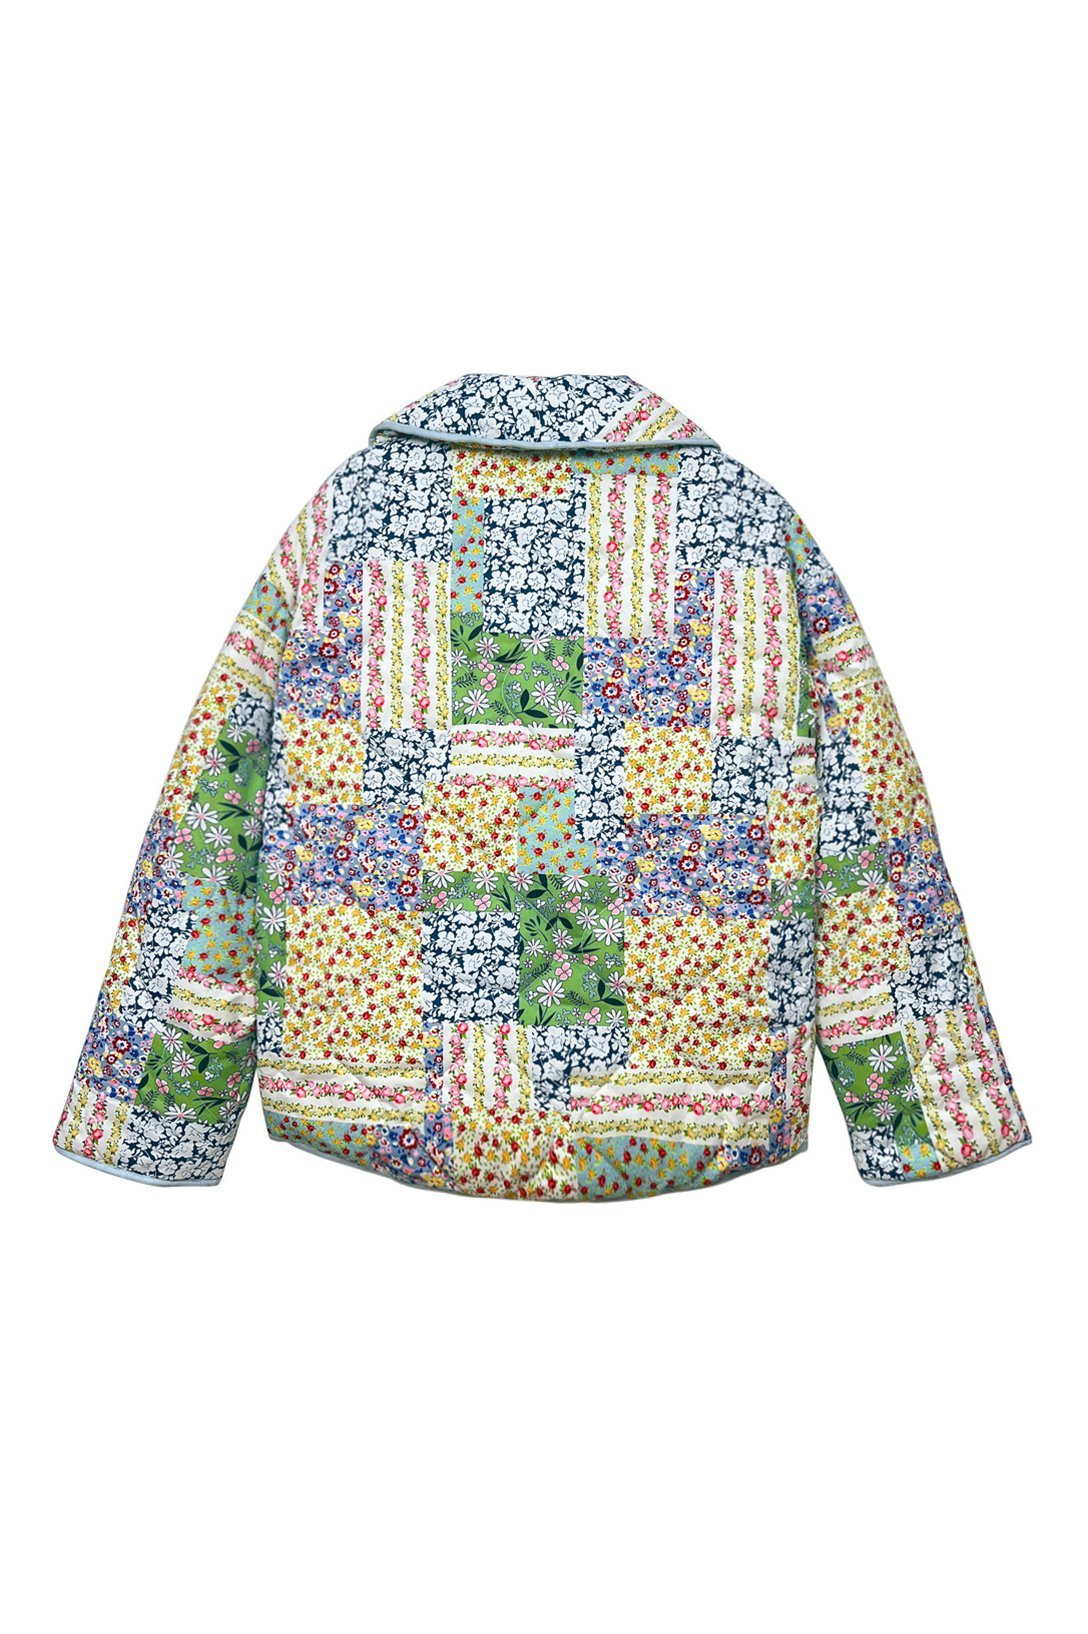 outerwear-Teagan Patchwork Floral Print Quilted Puffer Jacket-SO00611231946-Multi-S - Sunfere